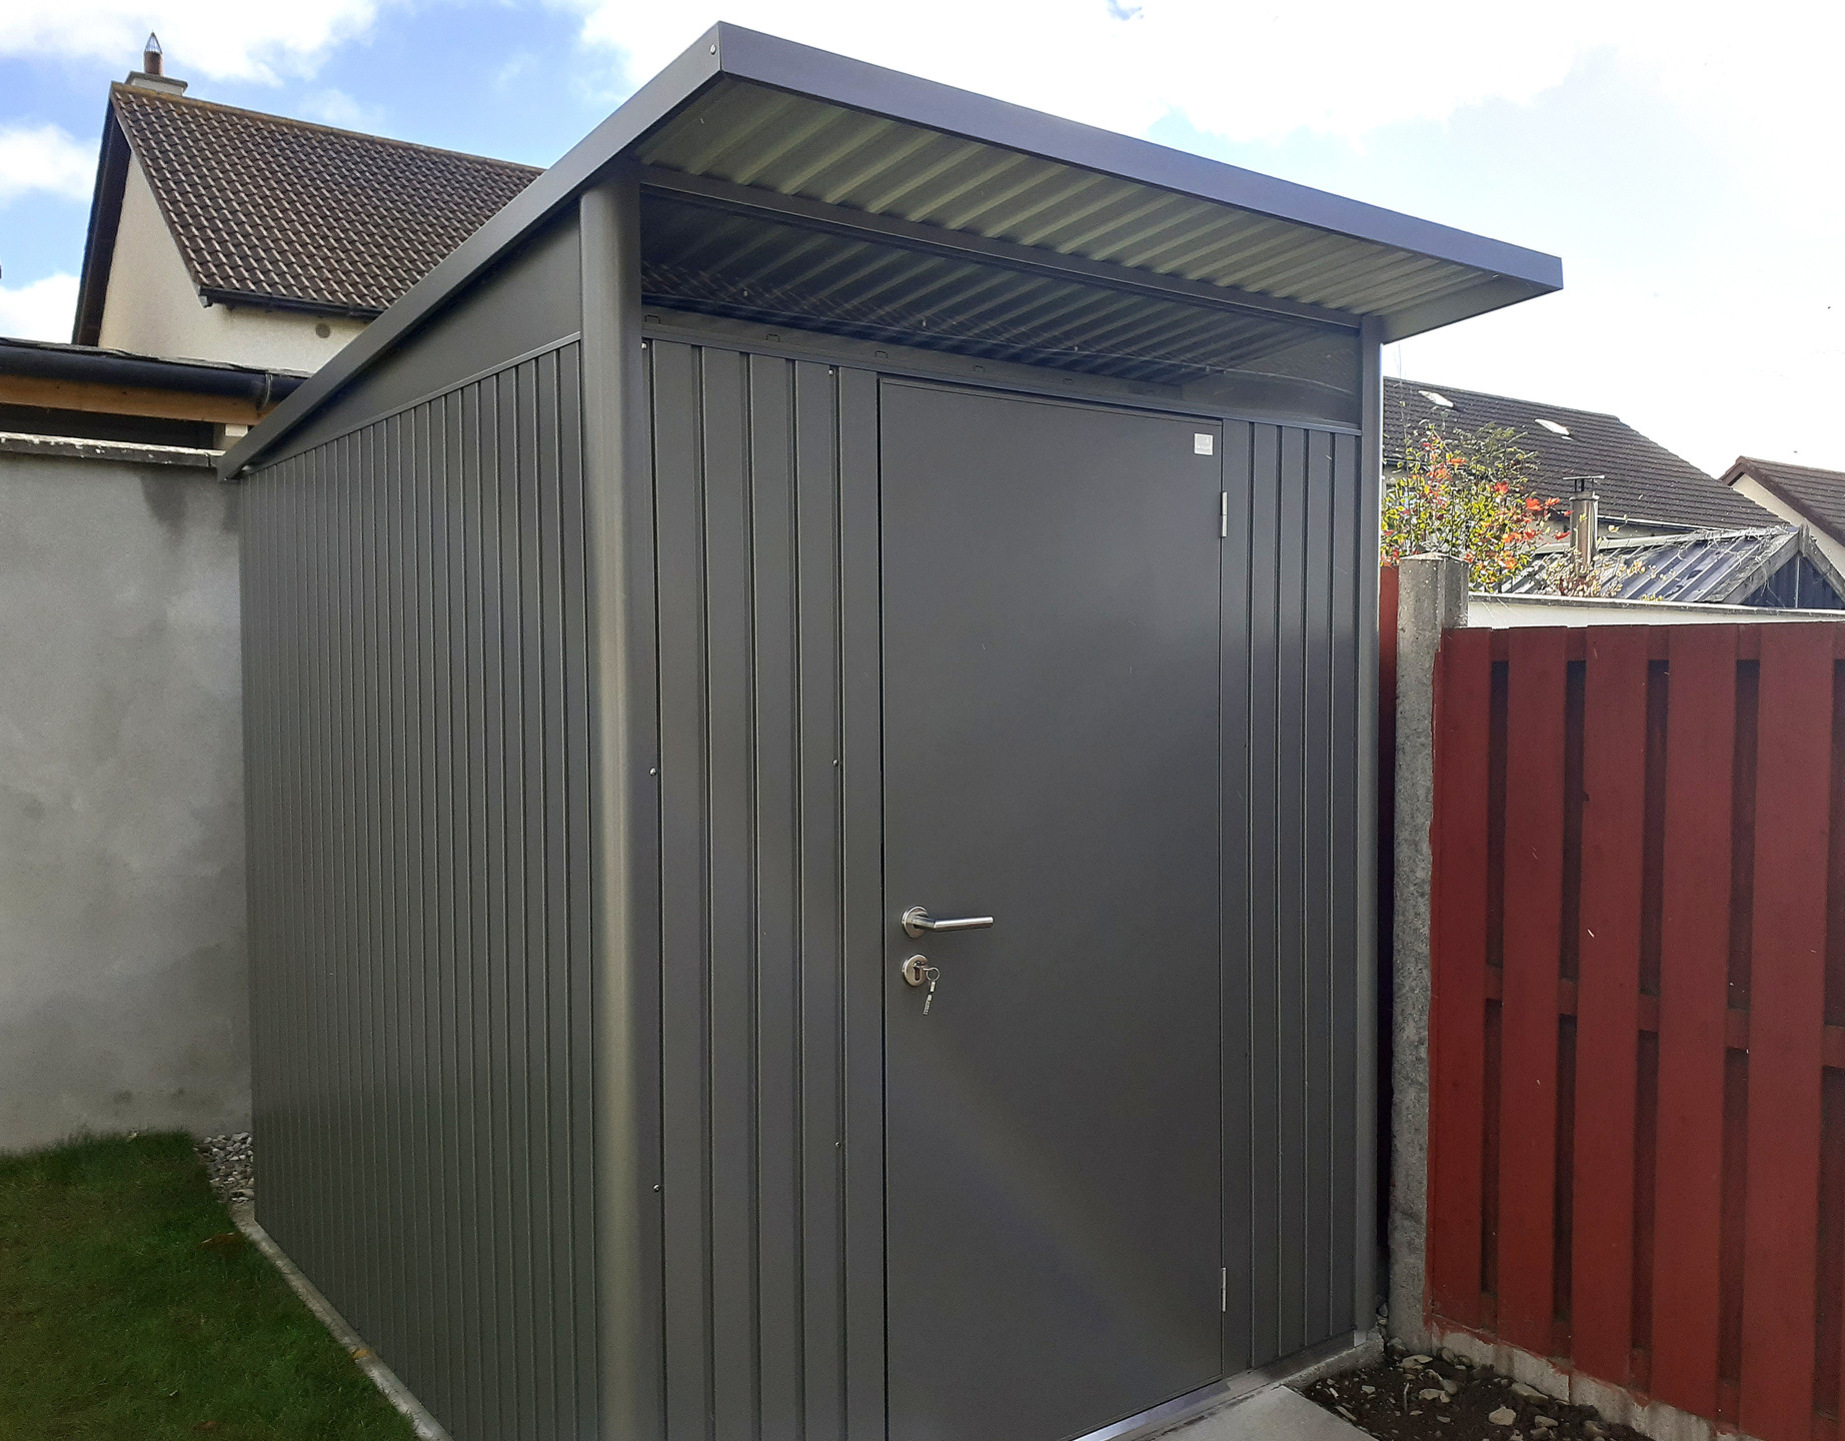 Biohort AvantGarde A2 in metallic quartz grey, supplied + fitted in Dundalk, Co Louth | Pay less for Biohort at Owen Chubb GardenStudio, Tel 087-2306 128